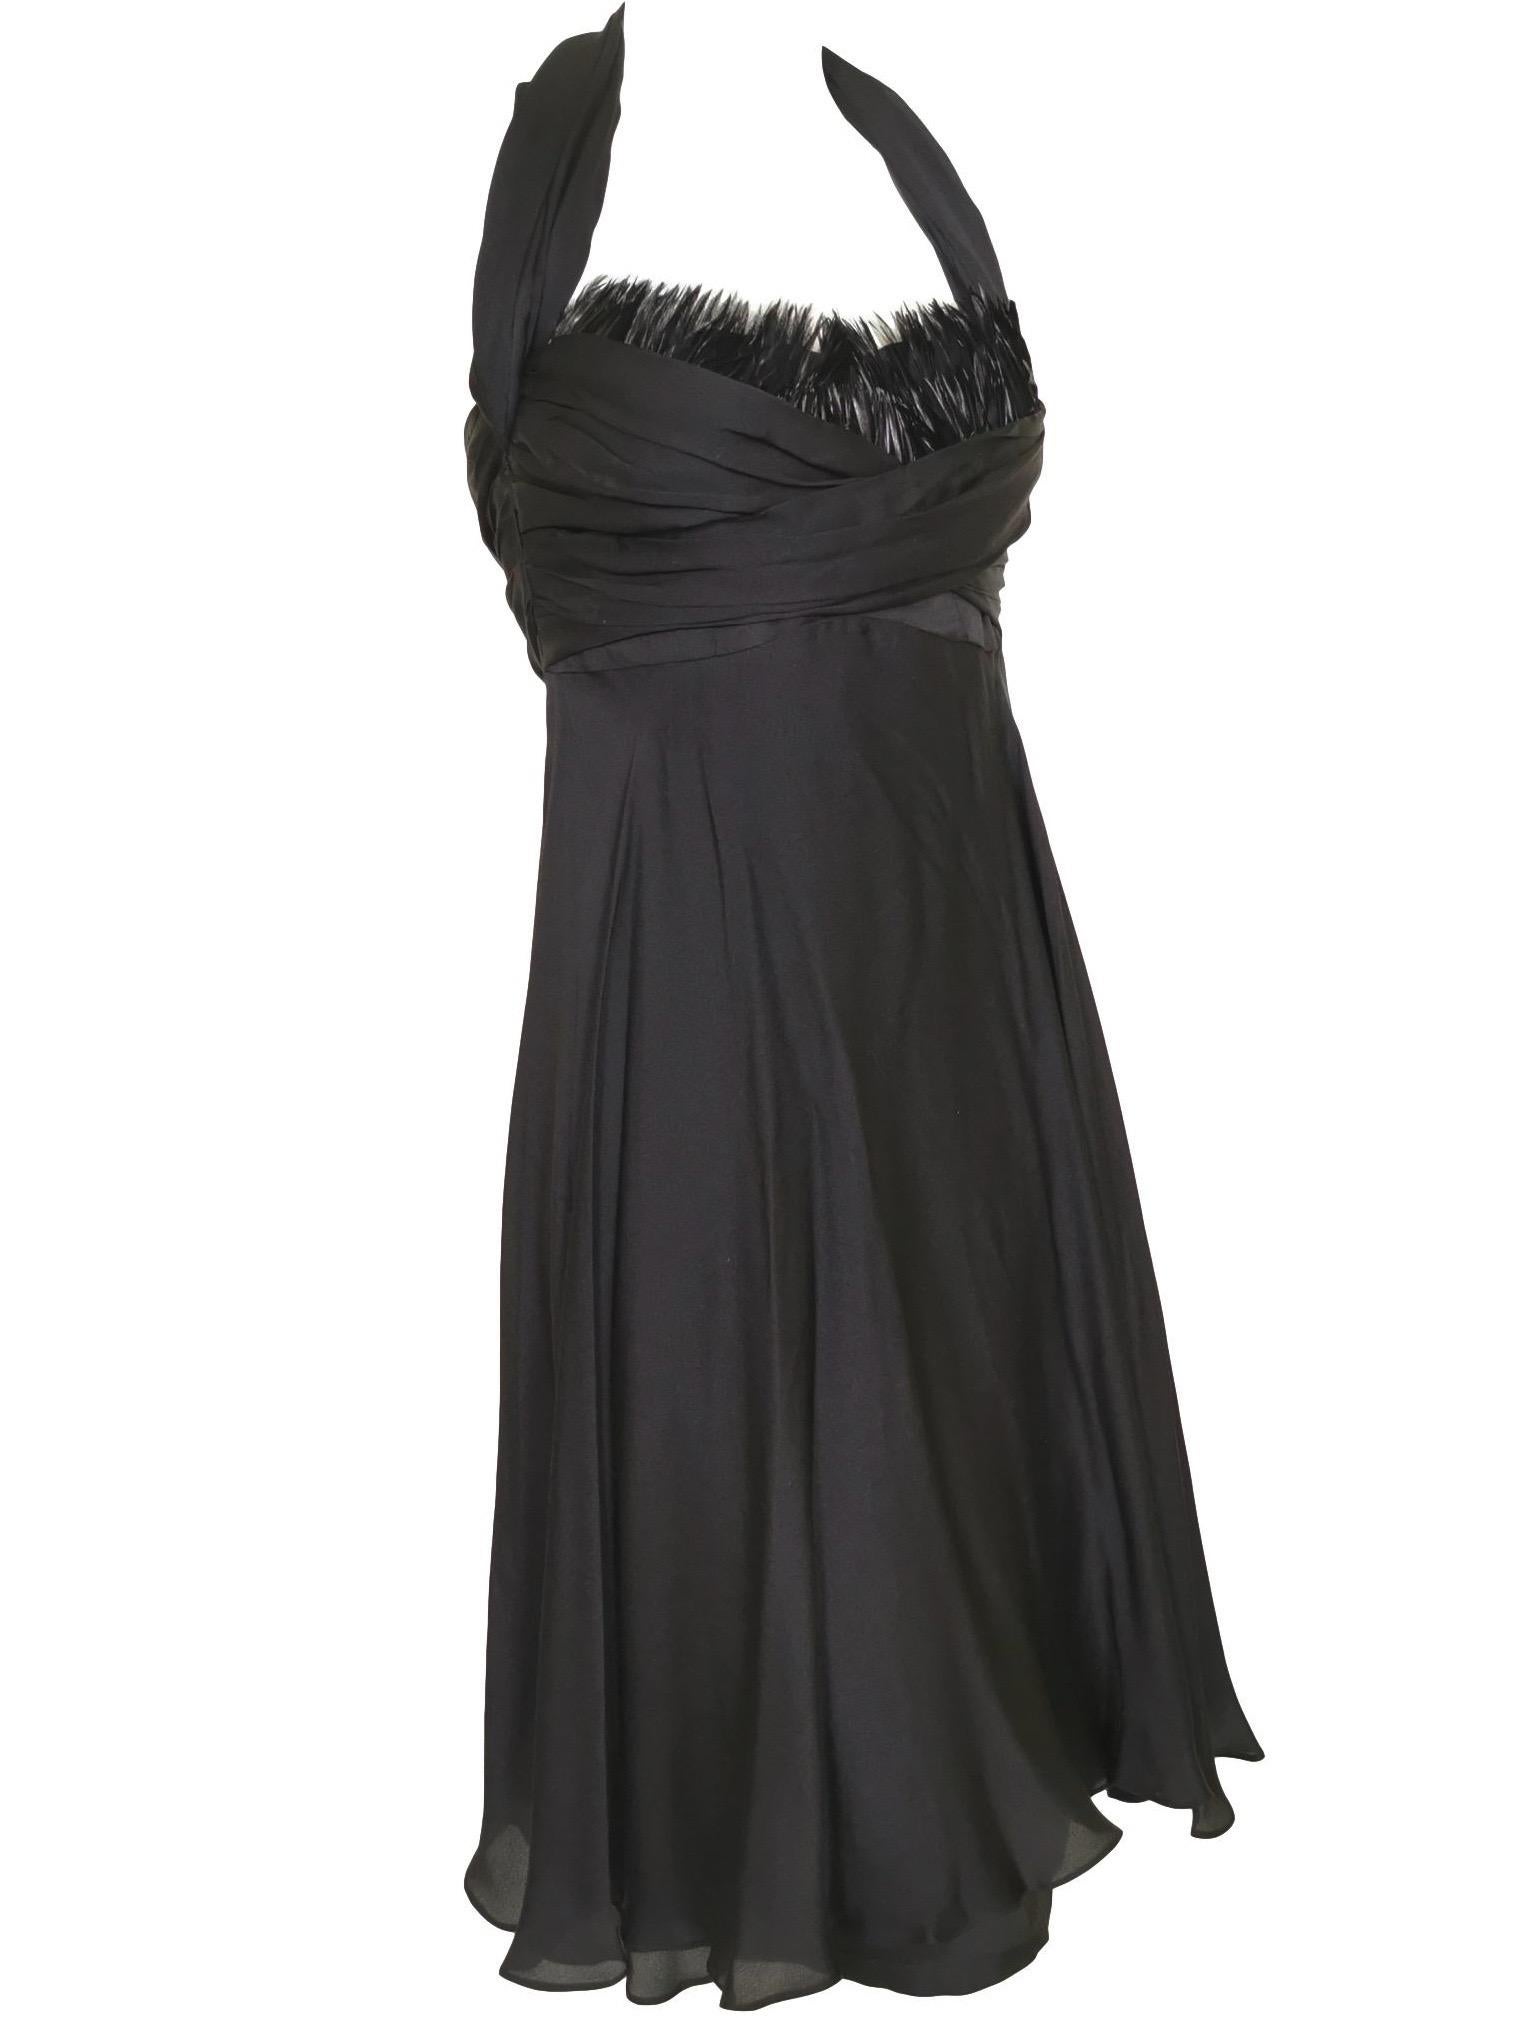 Sophie Sitbon Black Silk and Feather Dress For Sale 12